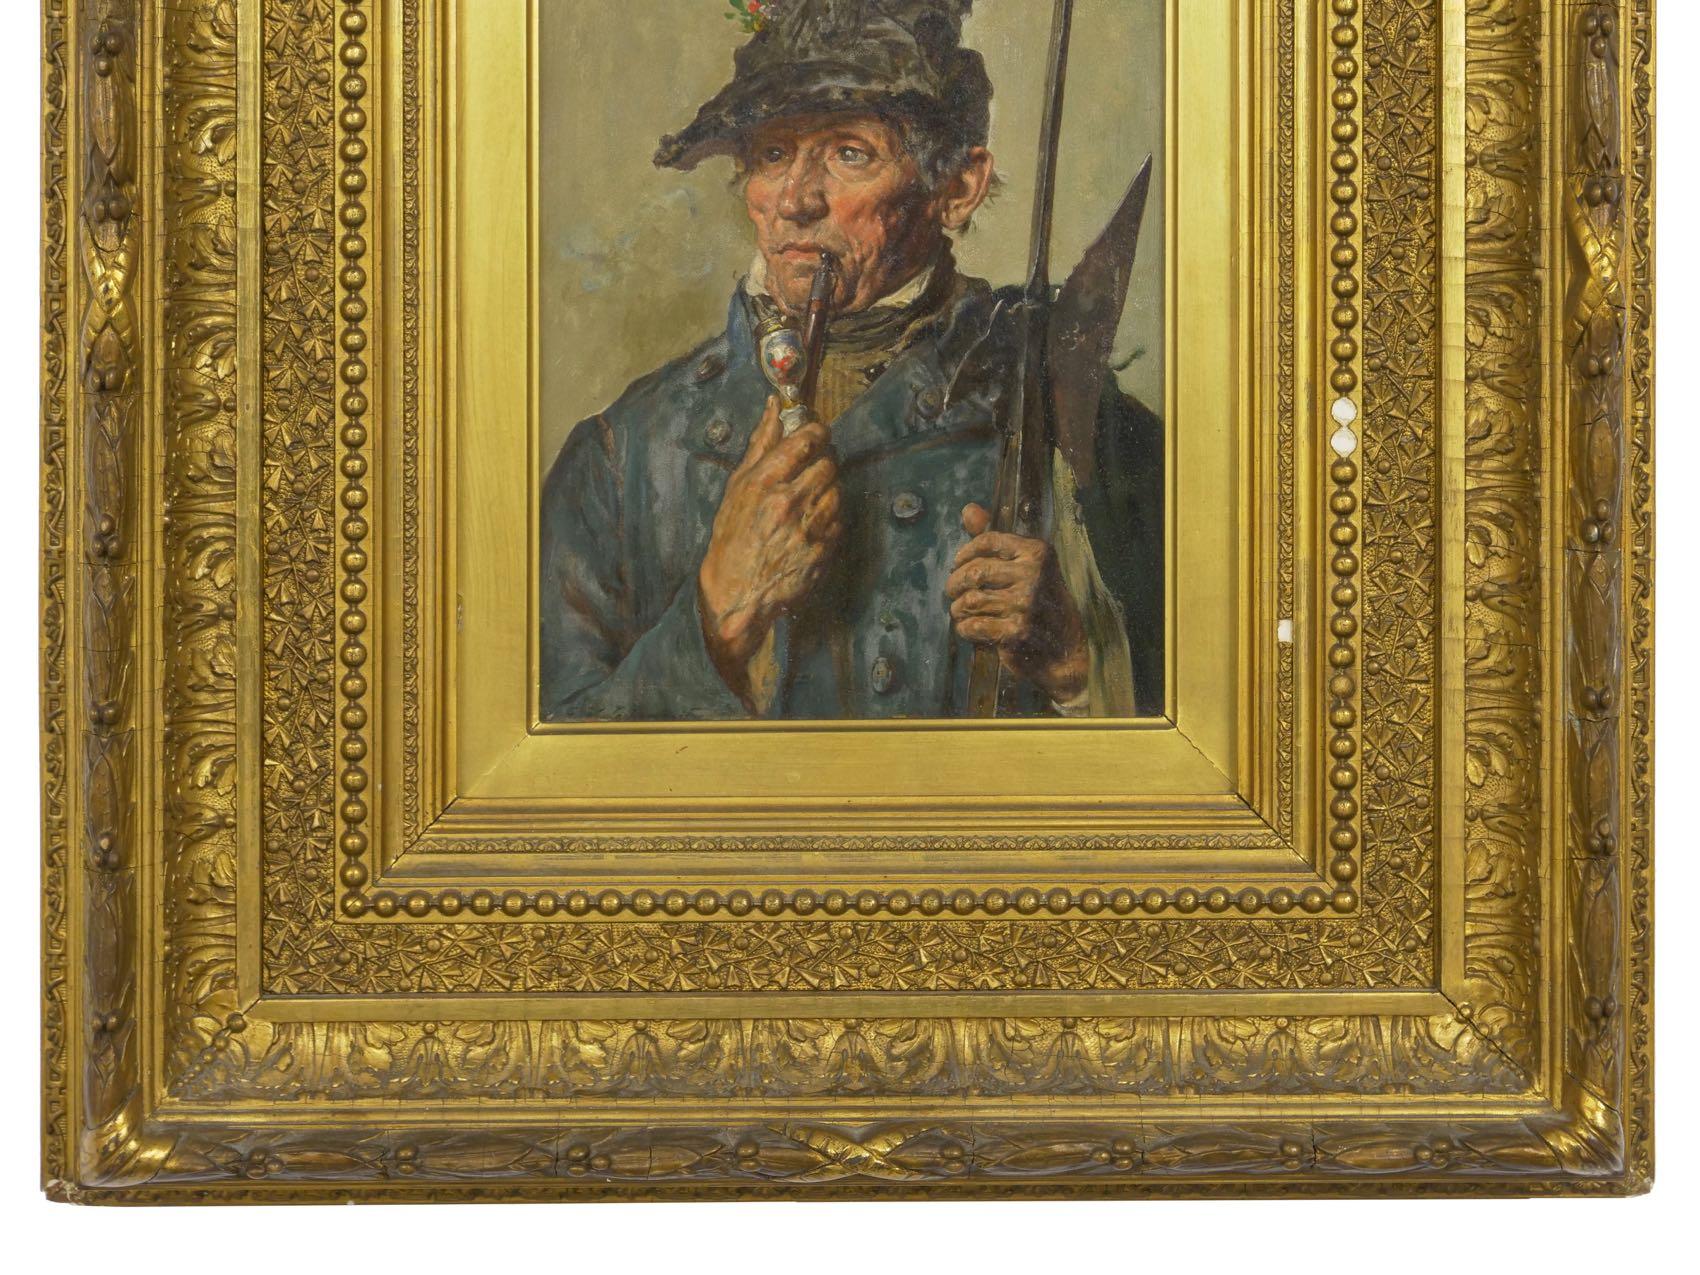 19th Century Oil Painting of a “16th Century Pikeman” Soldier's Portrait 1